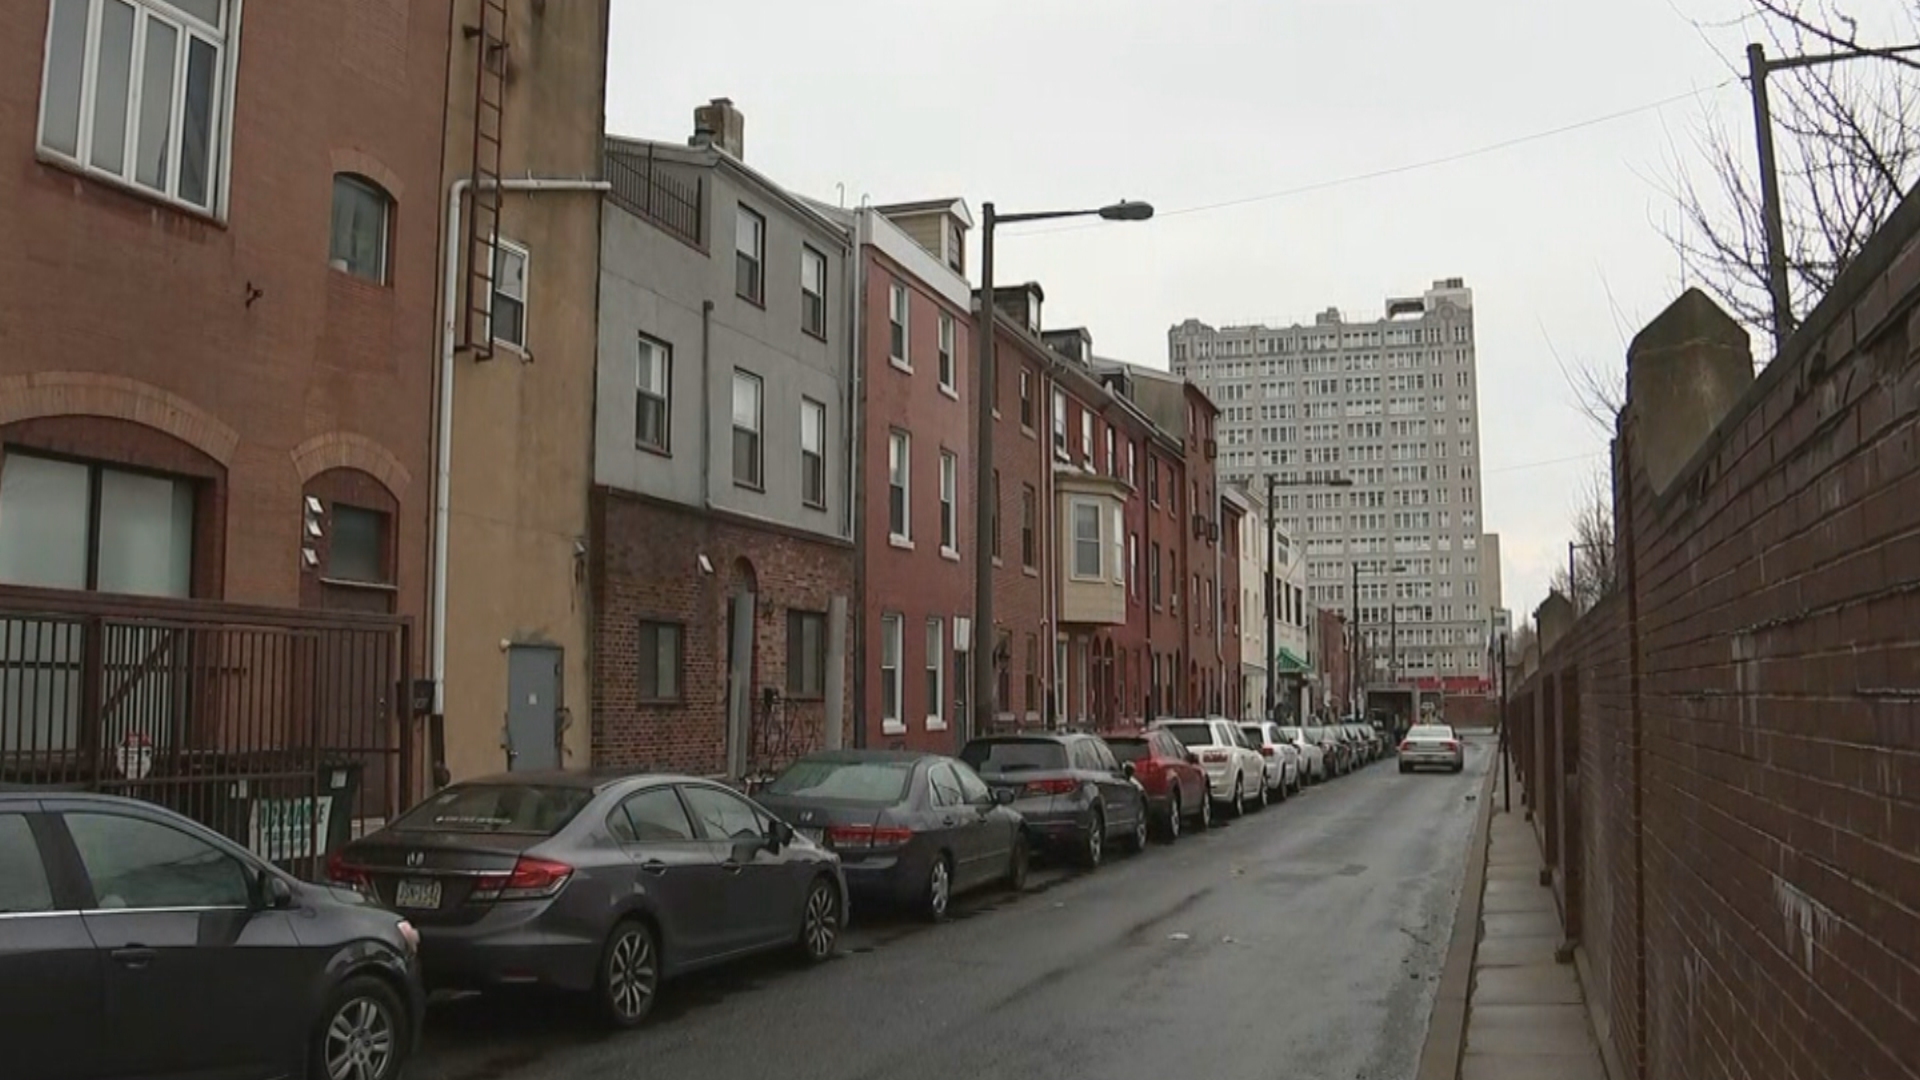 Philadelphia Police Searching For Suspect After Knife-Wielding Home Invasion In Chinatown